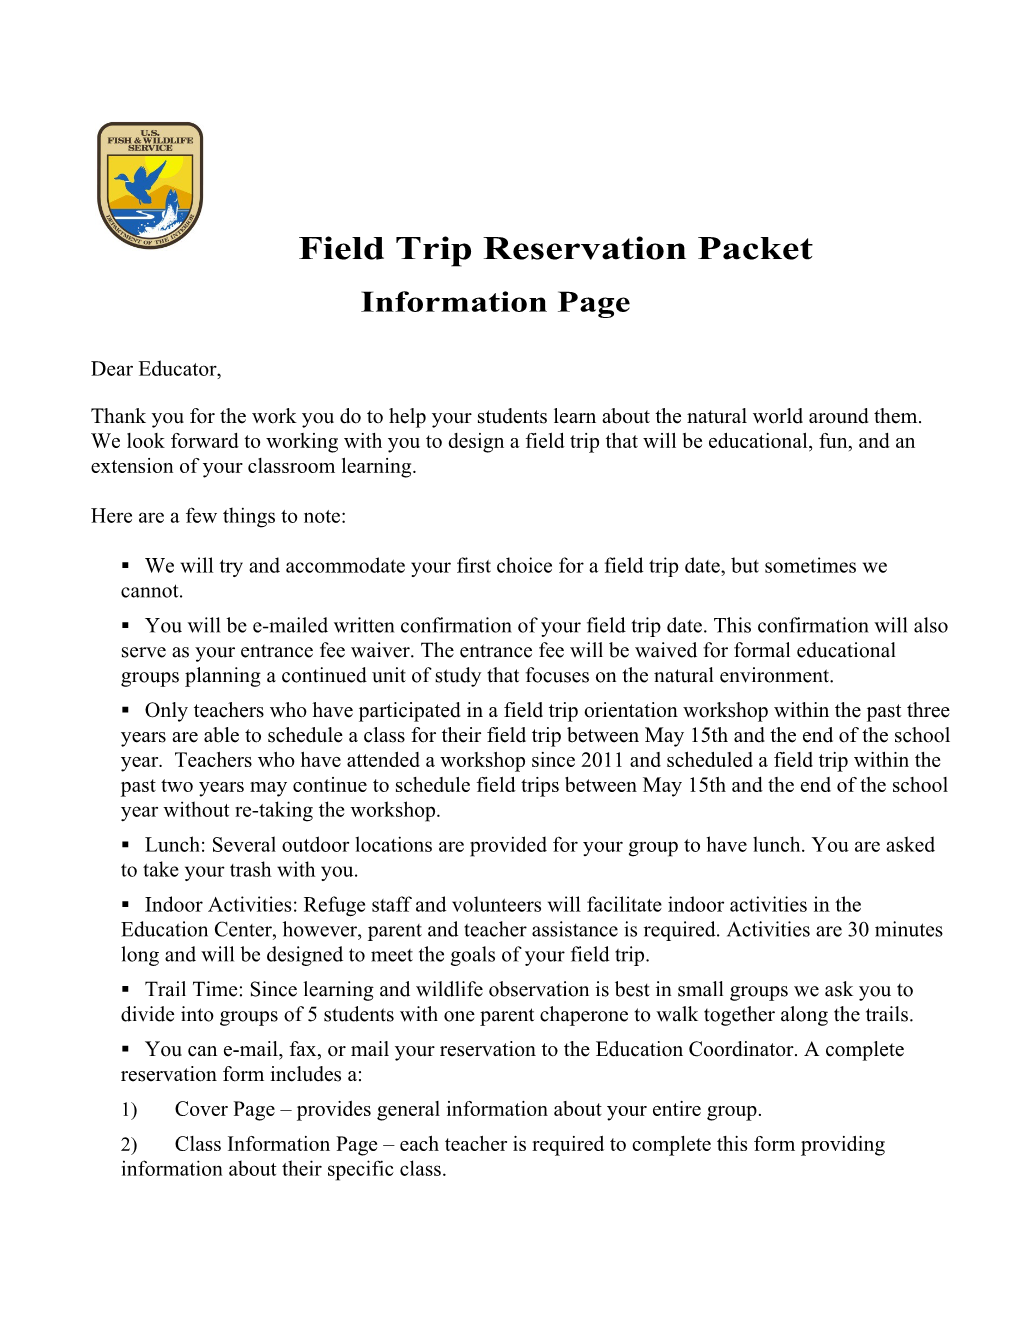 Field Trip Reservation Packet Information Page